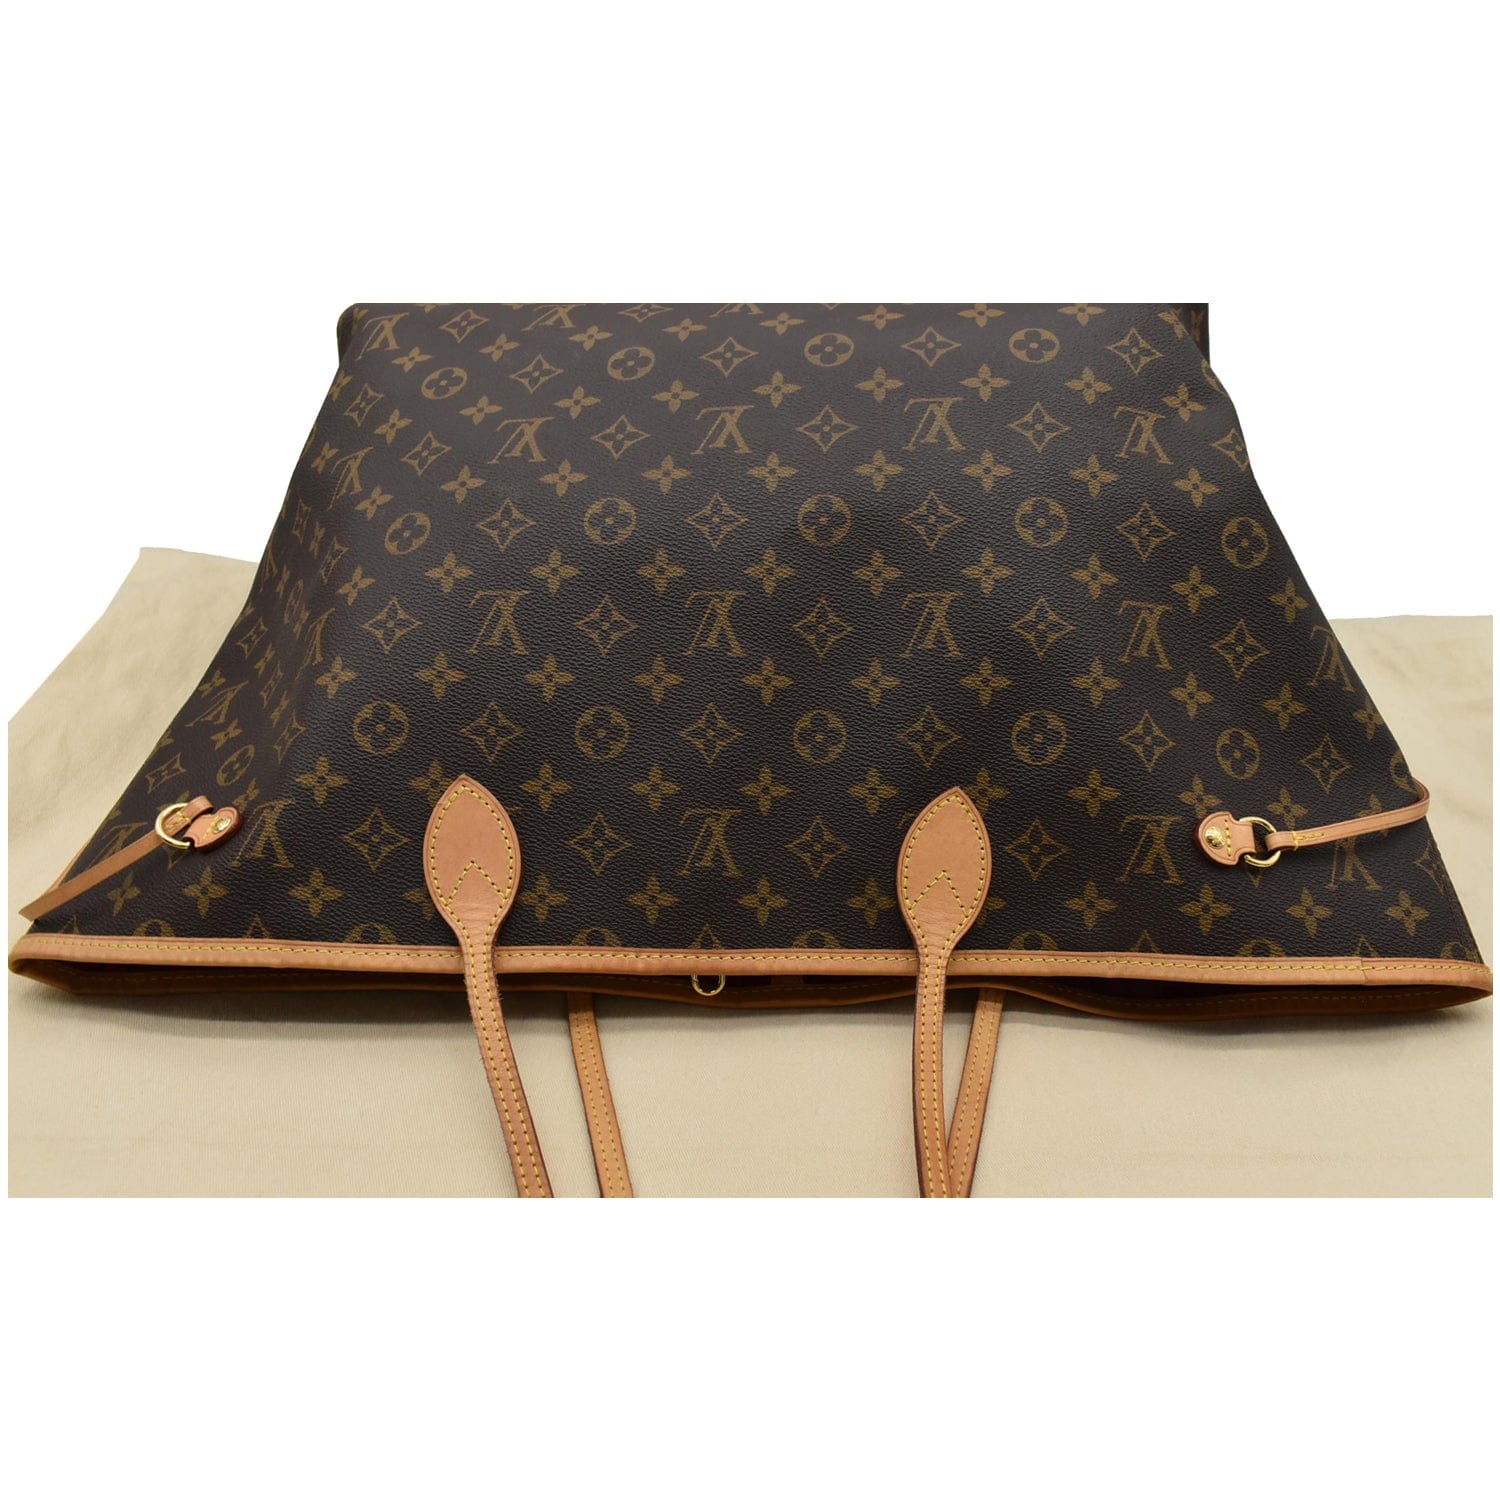 Neverfull cloth tote Louis Vuitton Brown in Cloth - 38008528